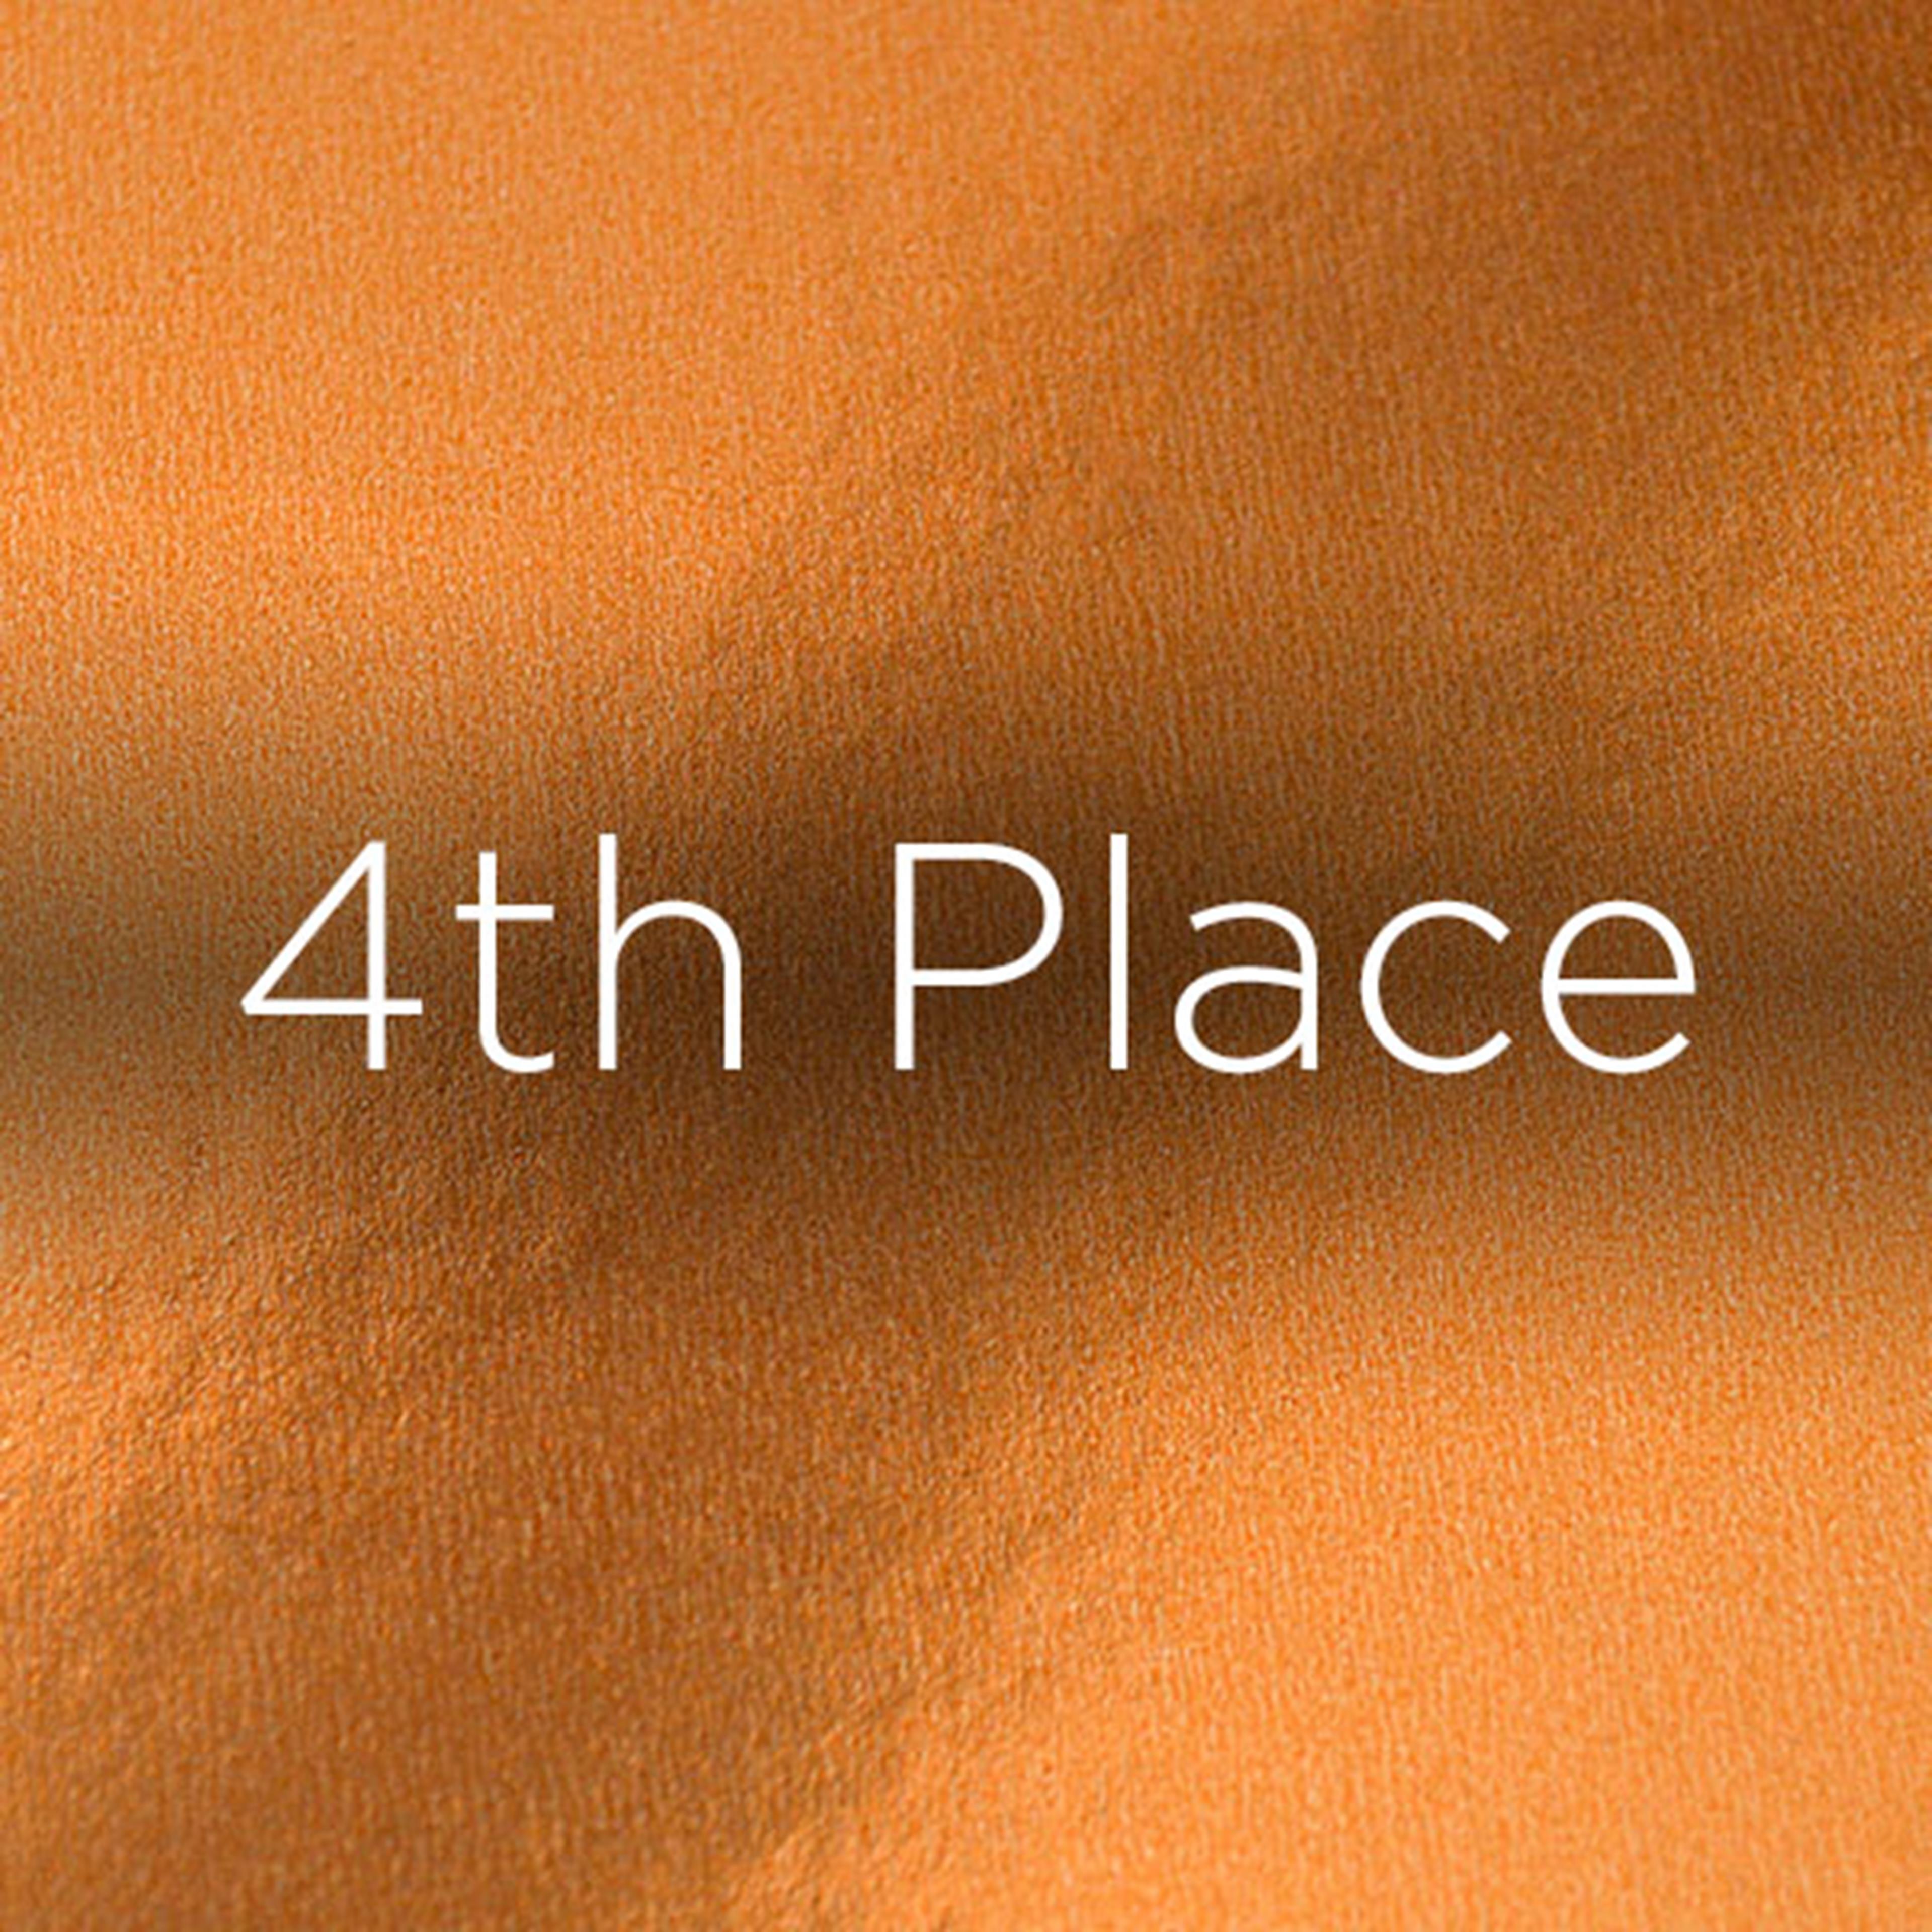 Fourth place